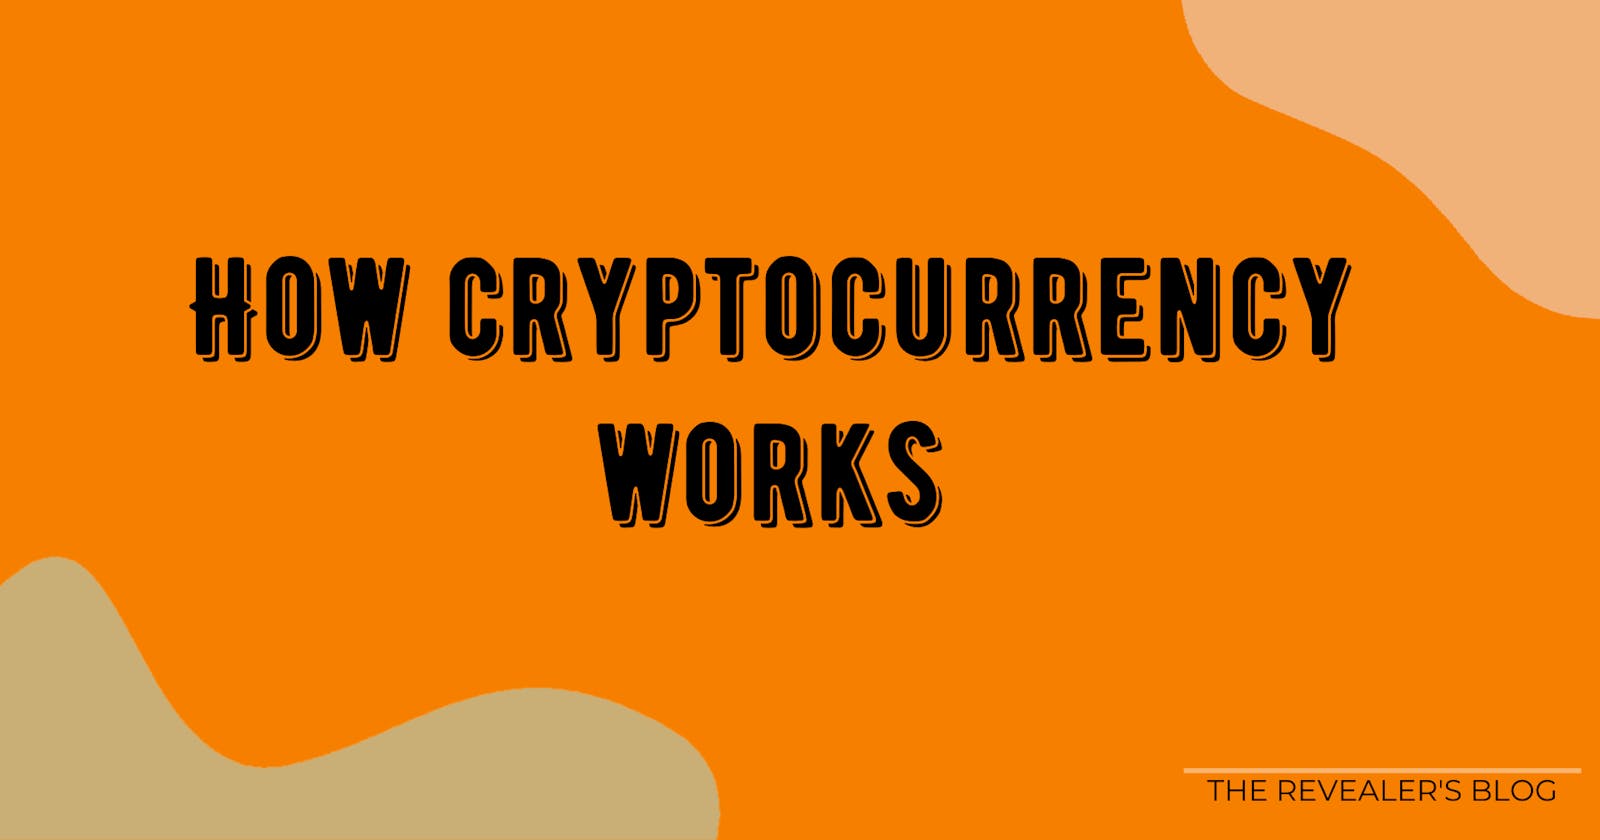 HOW CRYPTOCURRENCY ACTUALLY WORK - Everything you need to know